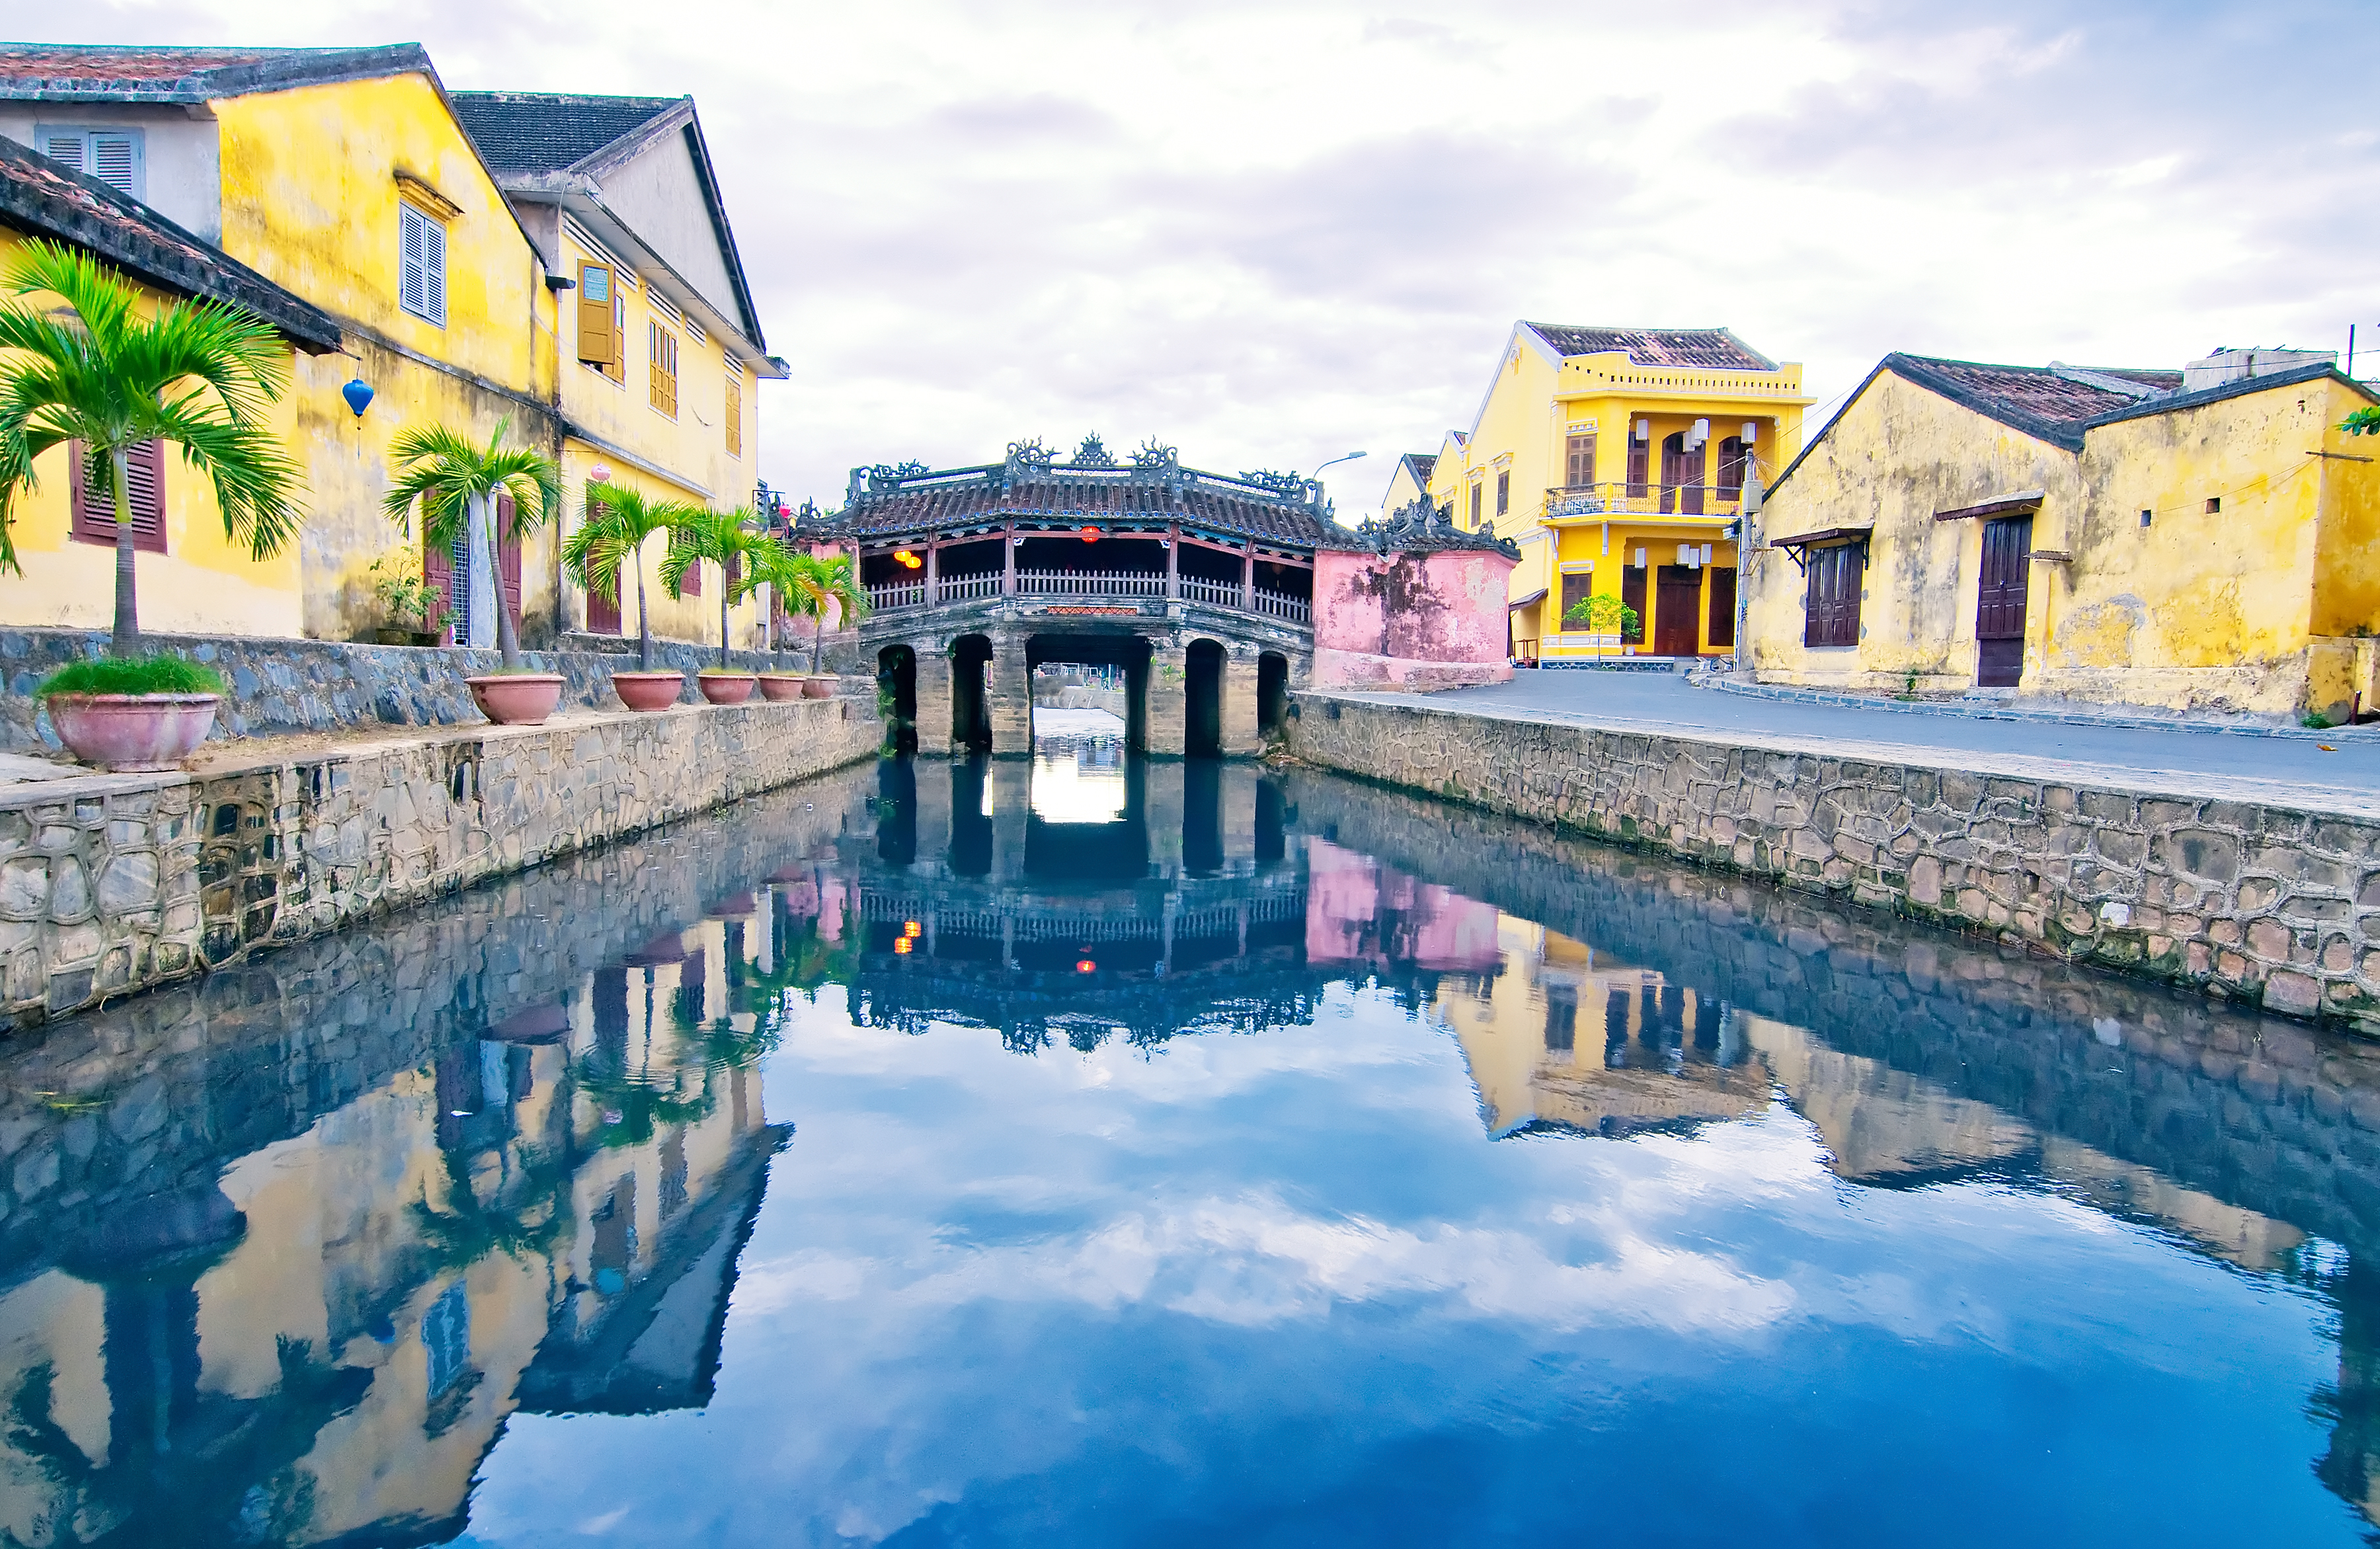 Where should I stay in Hoi An, at the beach or in town? - Tour East ...